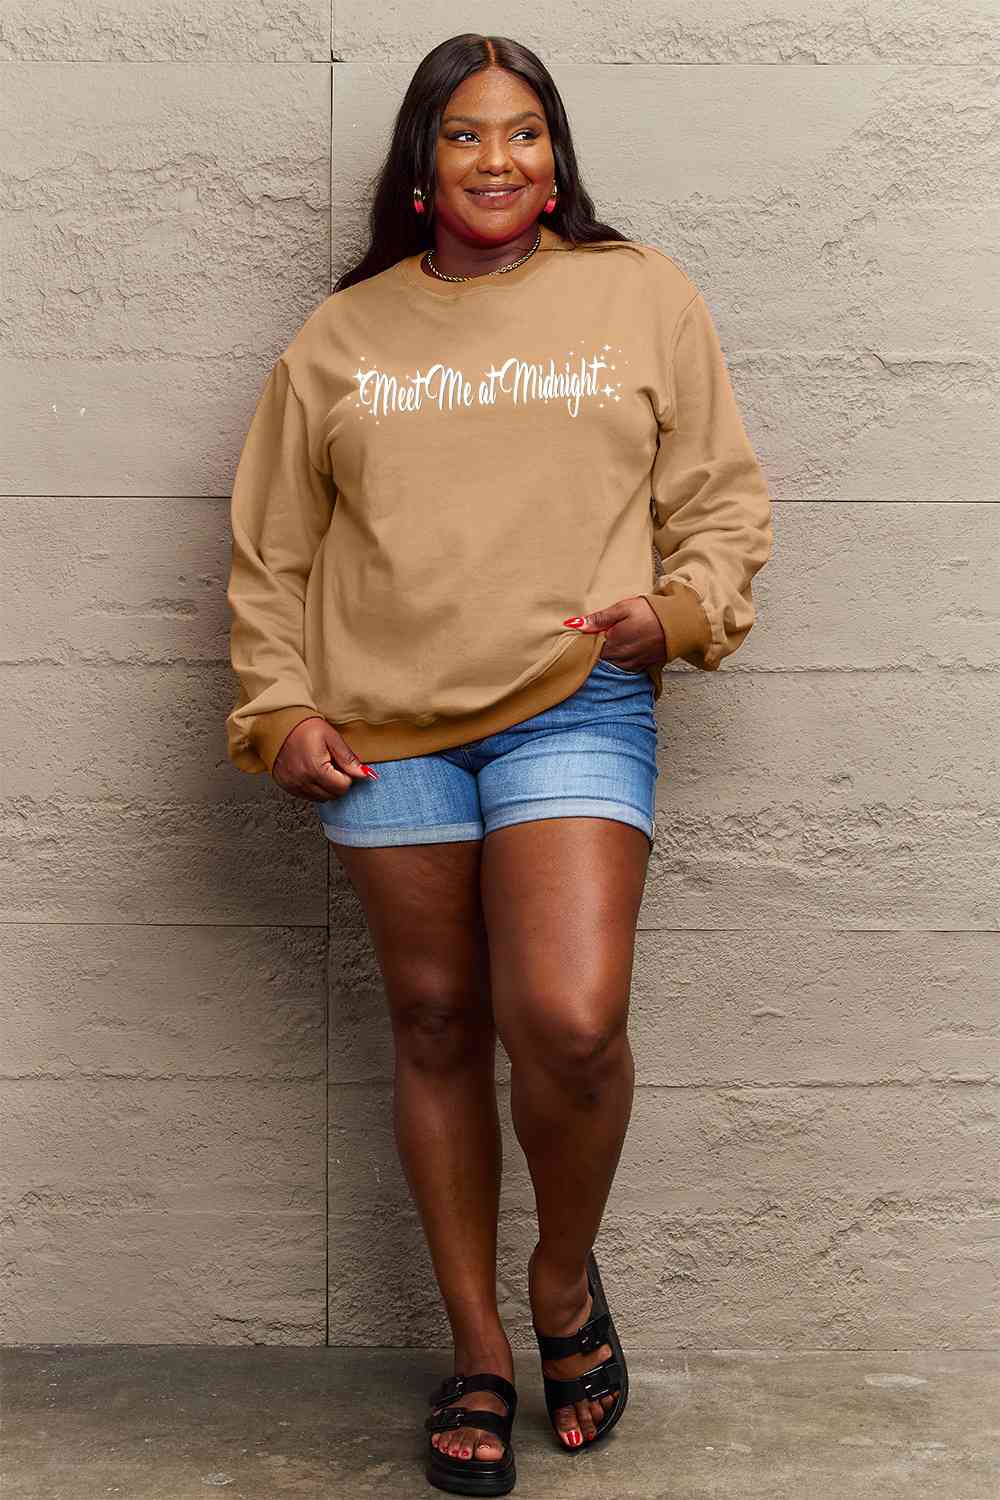 Simply Love Full Size MEET ME AT MIDNIGHT Graphic Round Neck Sweatshirt